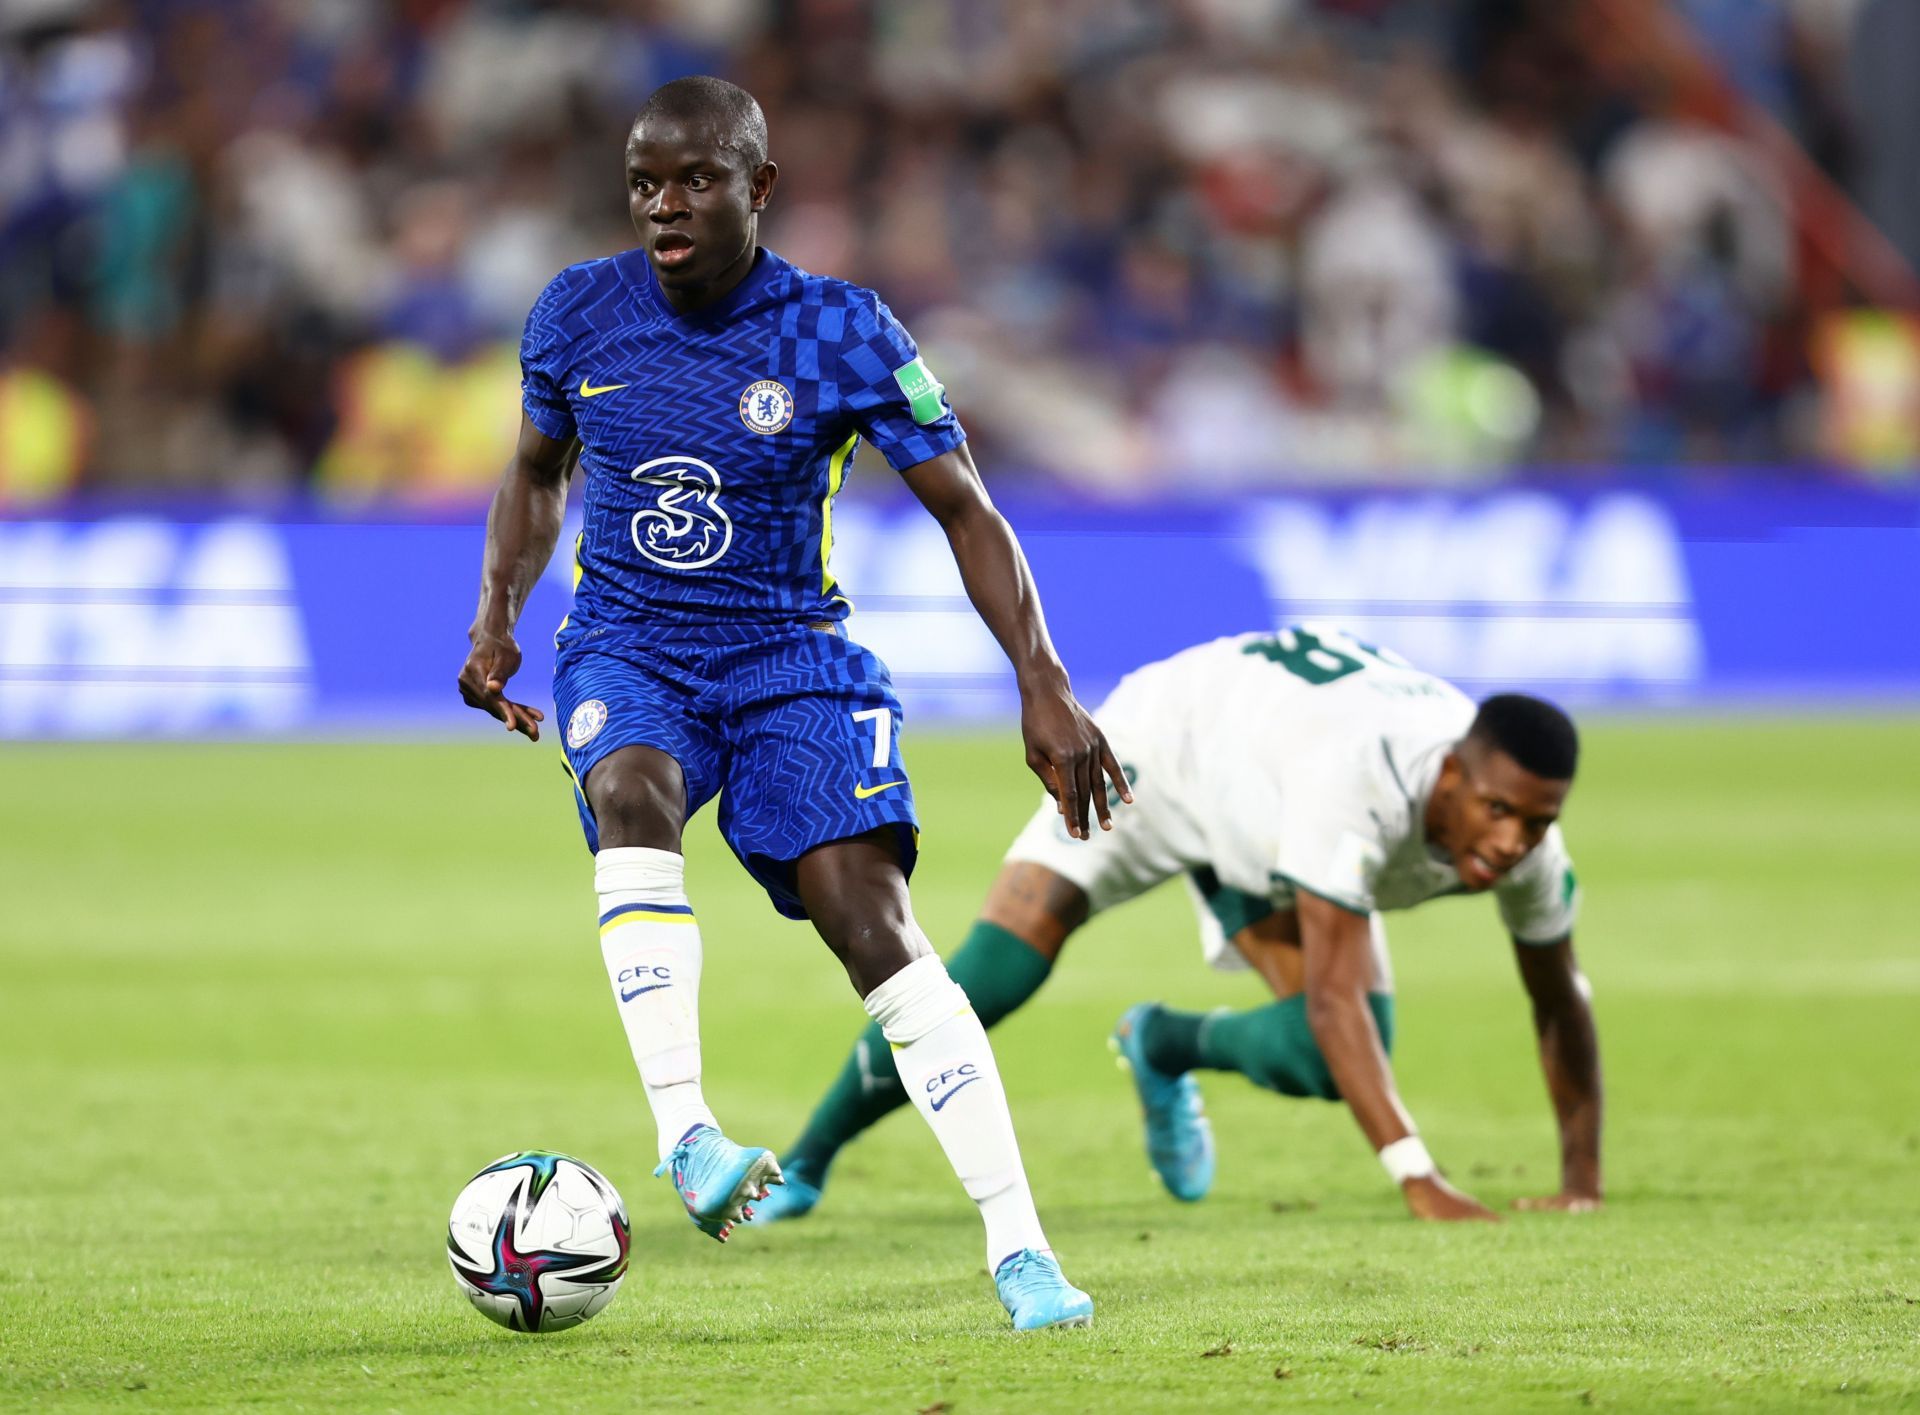 Kante playing for Chelsea during a FIFA Club World Cup UAE 2021 match